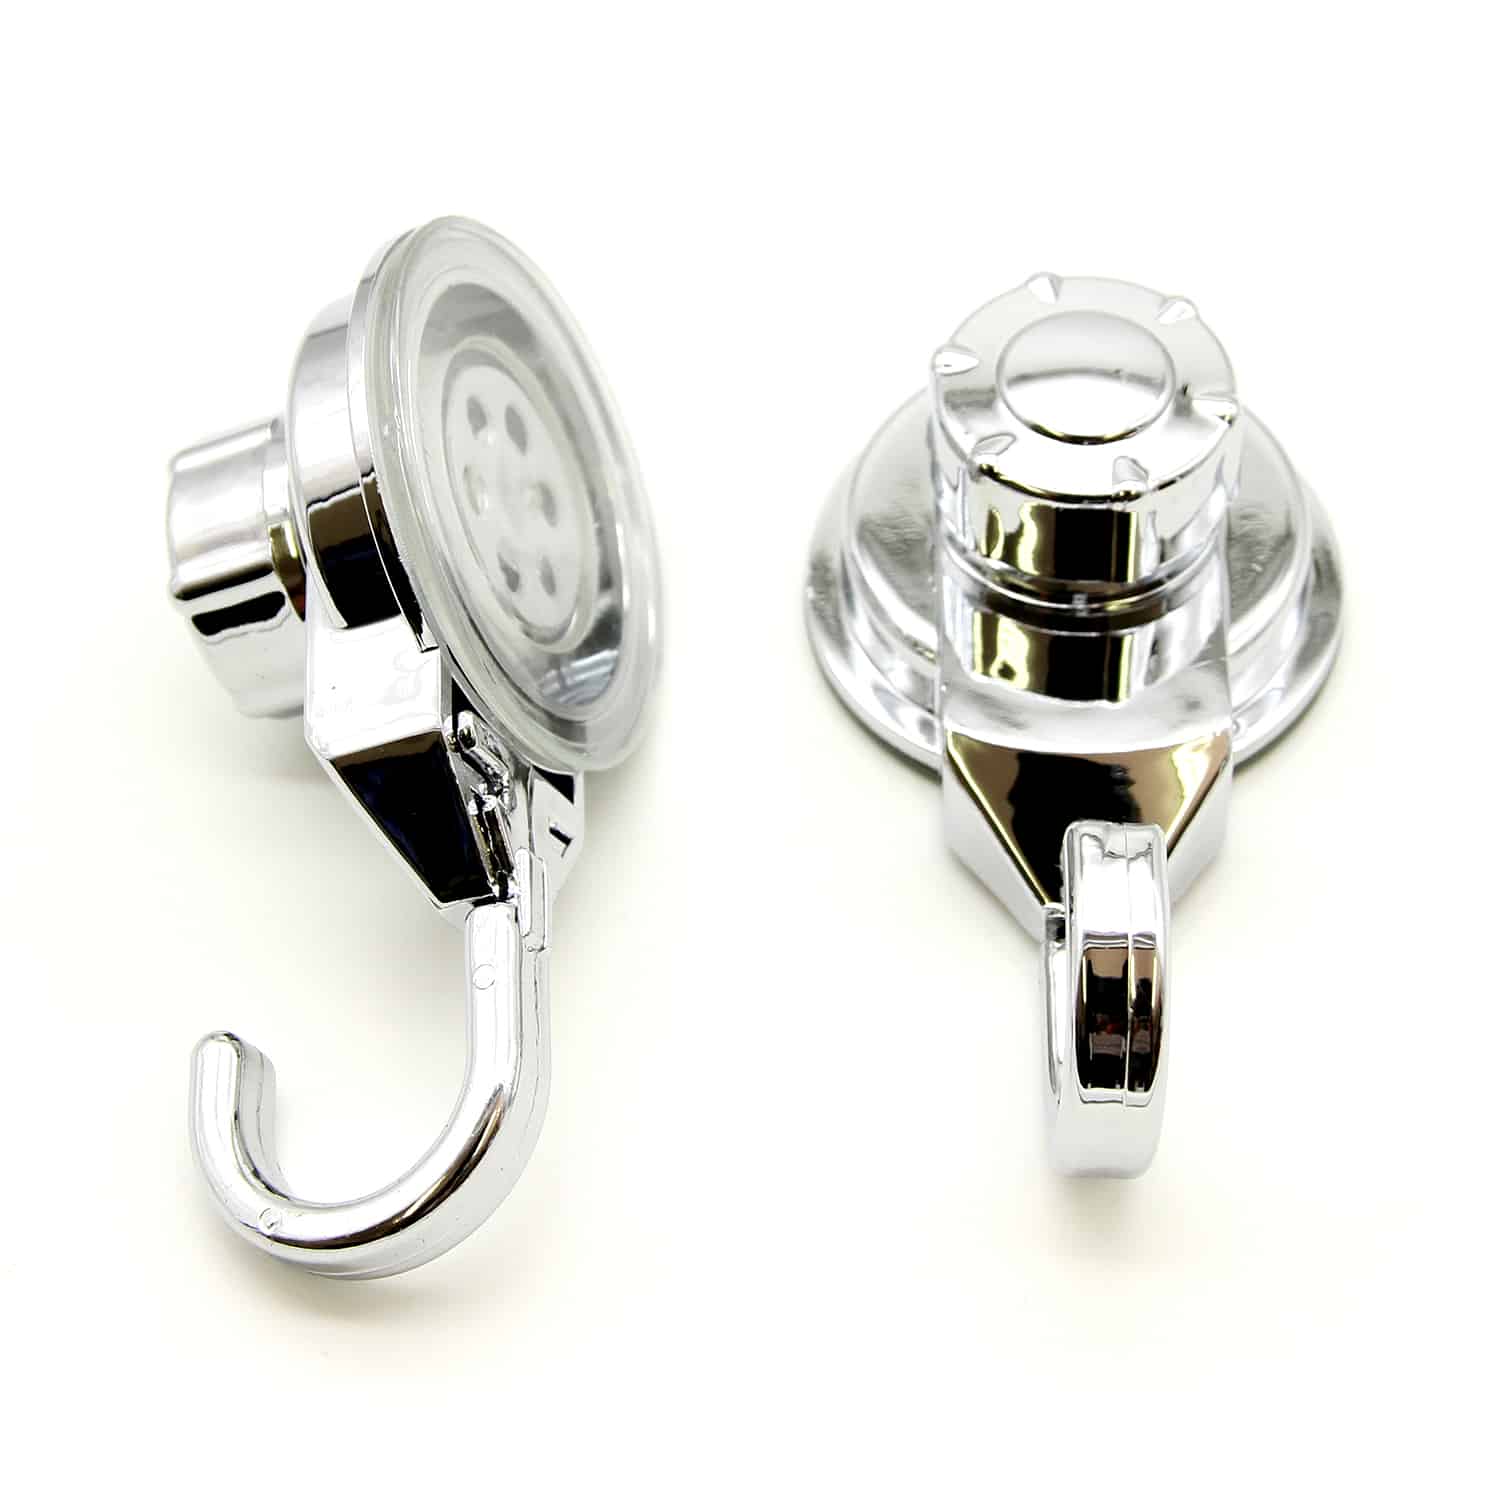 Powerful Vacuum Suction Cup Hook For Towel Strong Stainless Steel